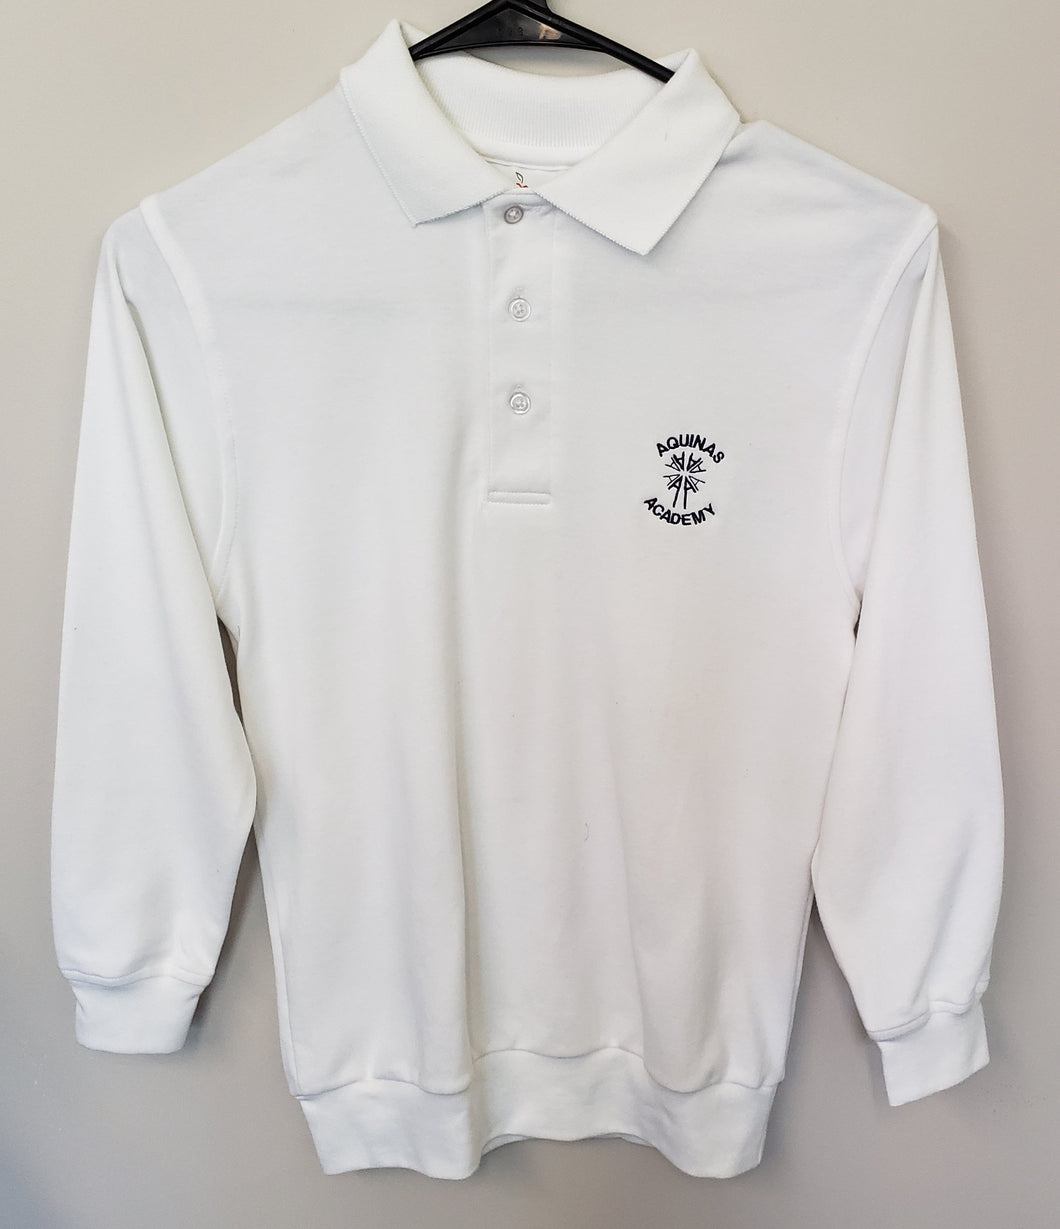 AA012 Aquinas Academy - Long Sleeve Banded Jersey Polo - White Only - Youth Sizes